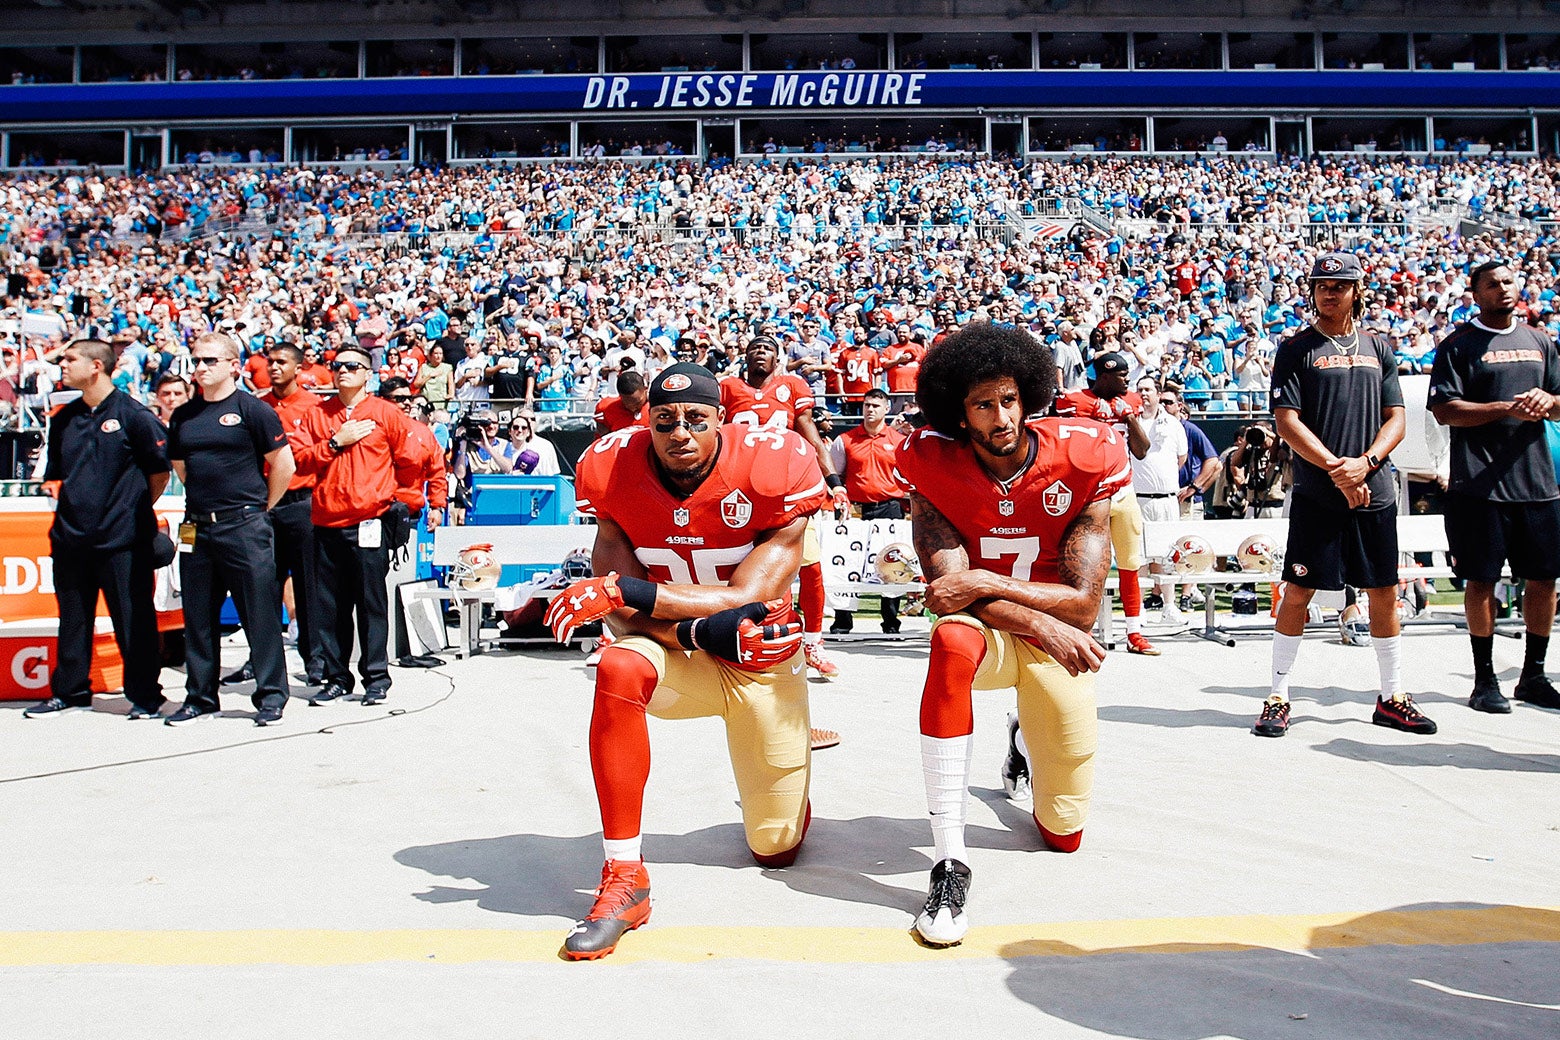 Eric Reid and Colin Kaepernick, then of the San Francisco 49ers, kneel on the sideline during the anthem, prior to a game against the Carolina Panthers on Sept. 18, 2016.